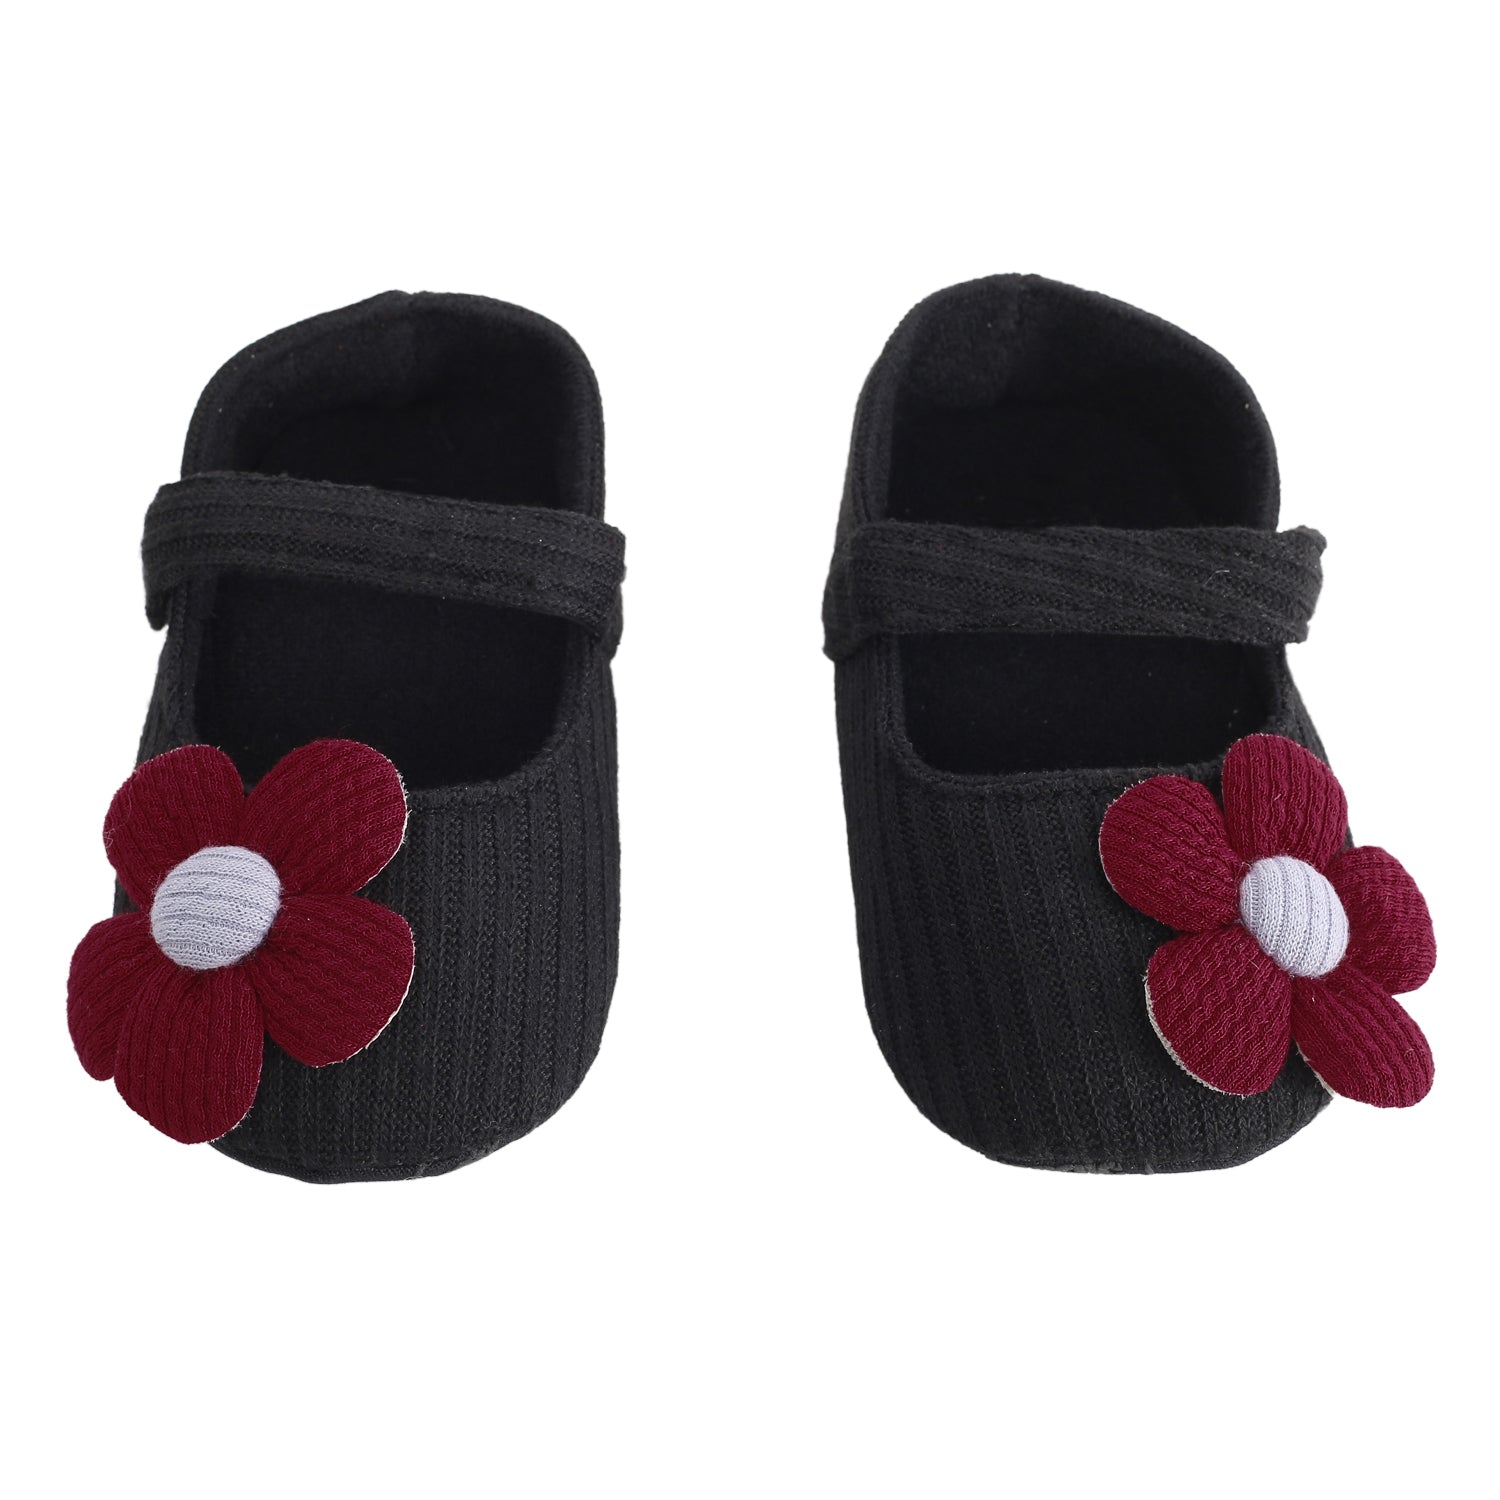 Baby Moo Floral Applique Black And Red Booties